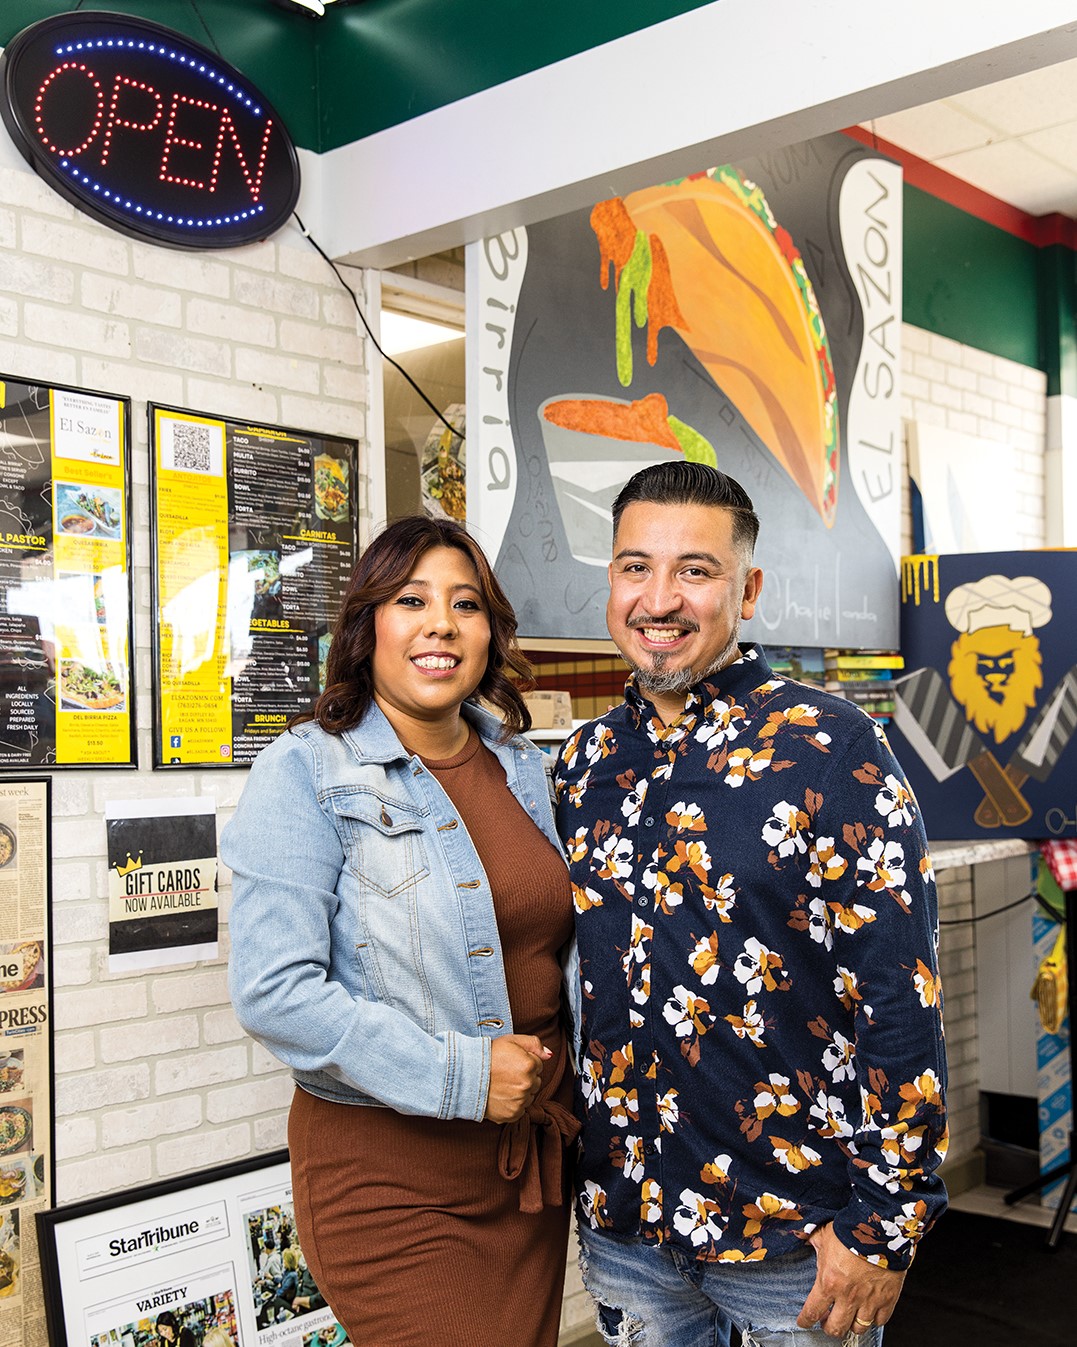 After years in the restaurant industry, Karen and Cristian De Leon were inspired to open a restaurant that reflects their own vision.